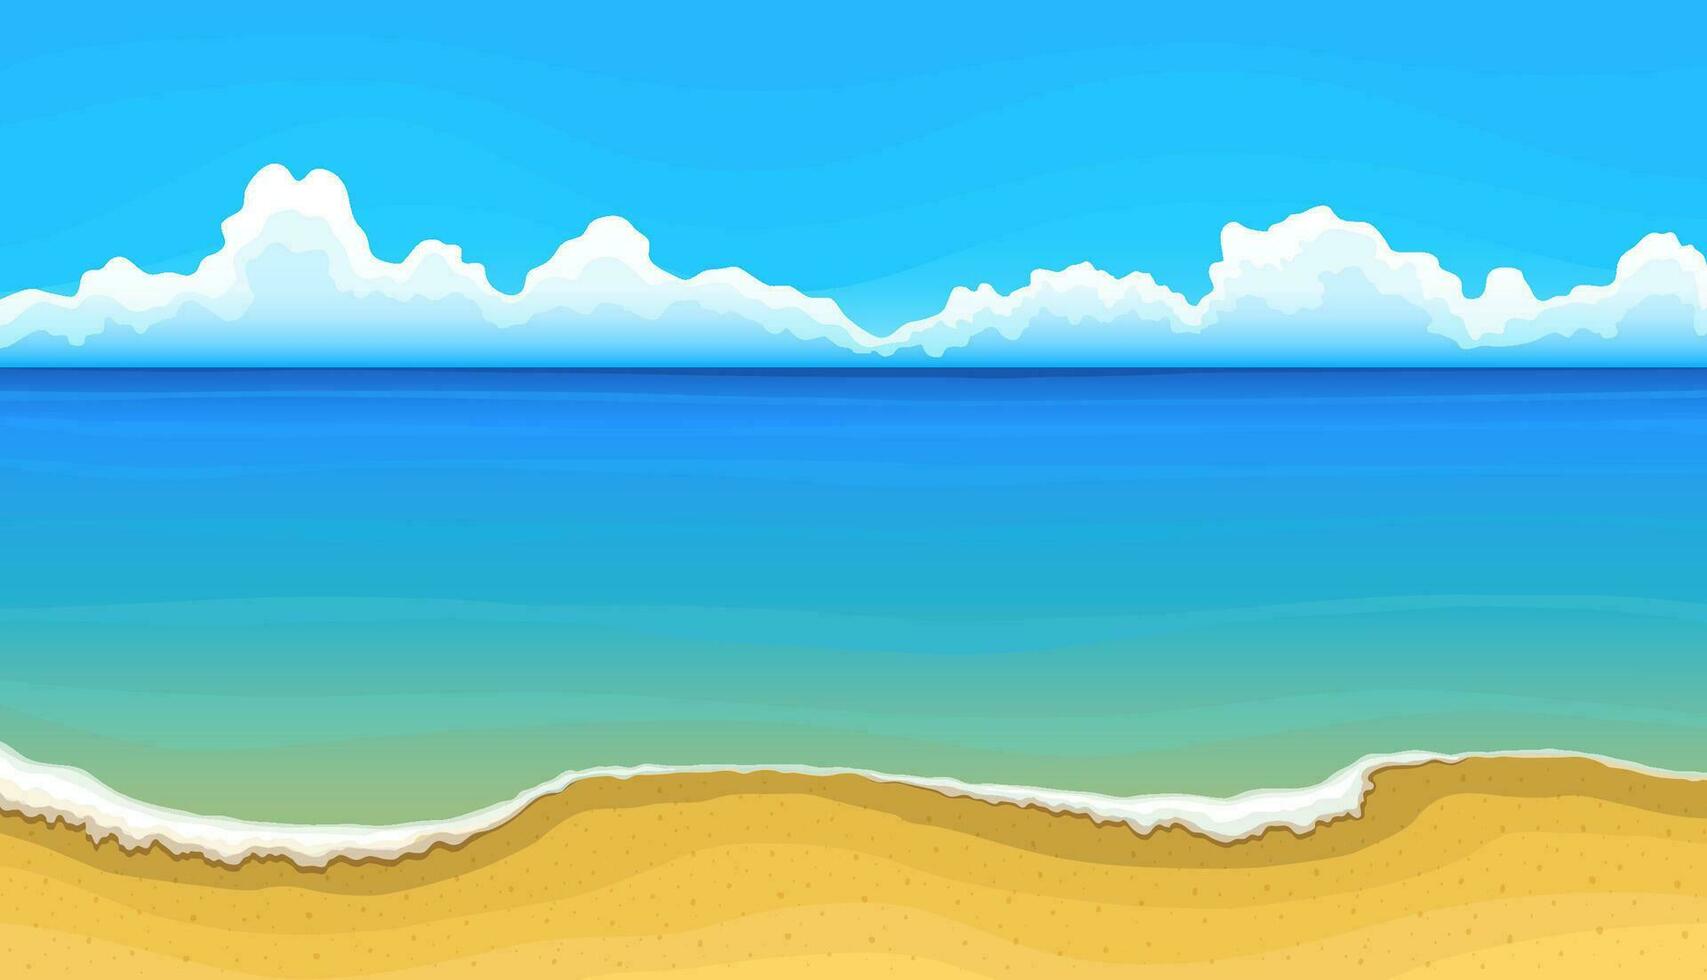 Sea beach with clouds on horizon vector